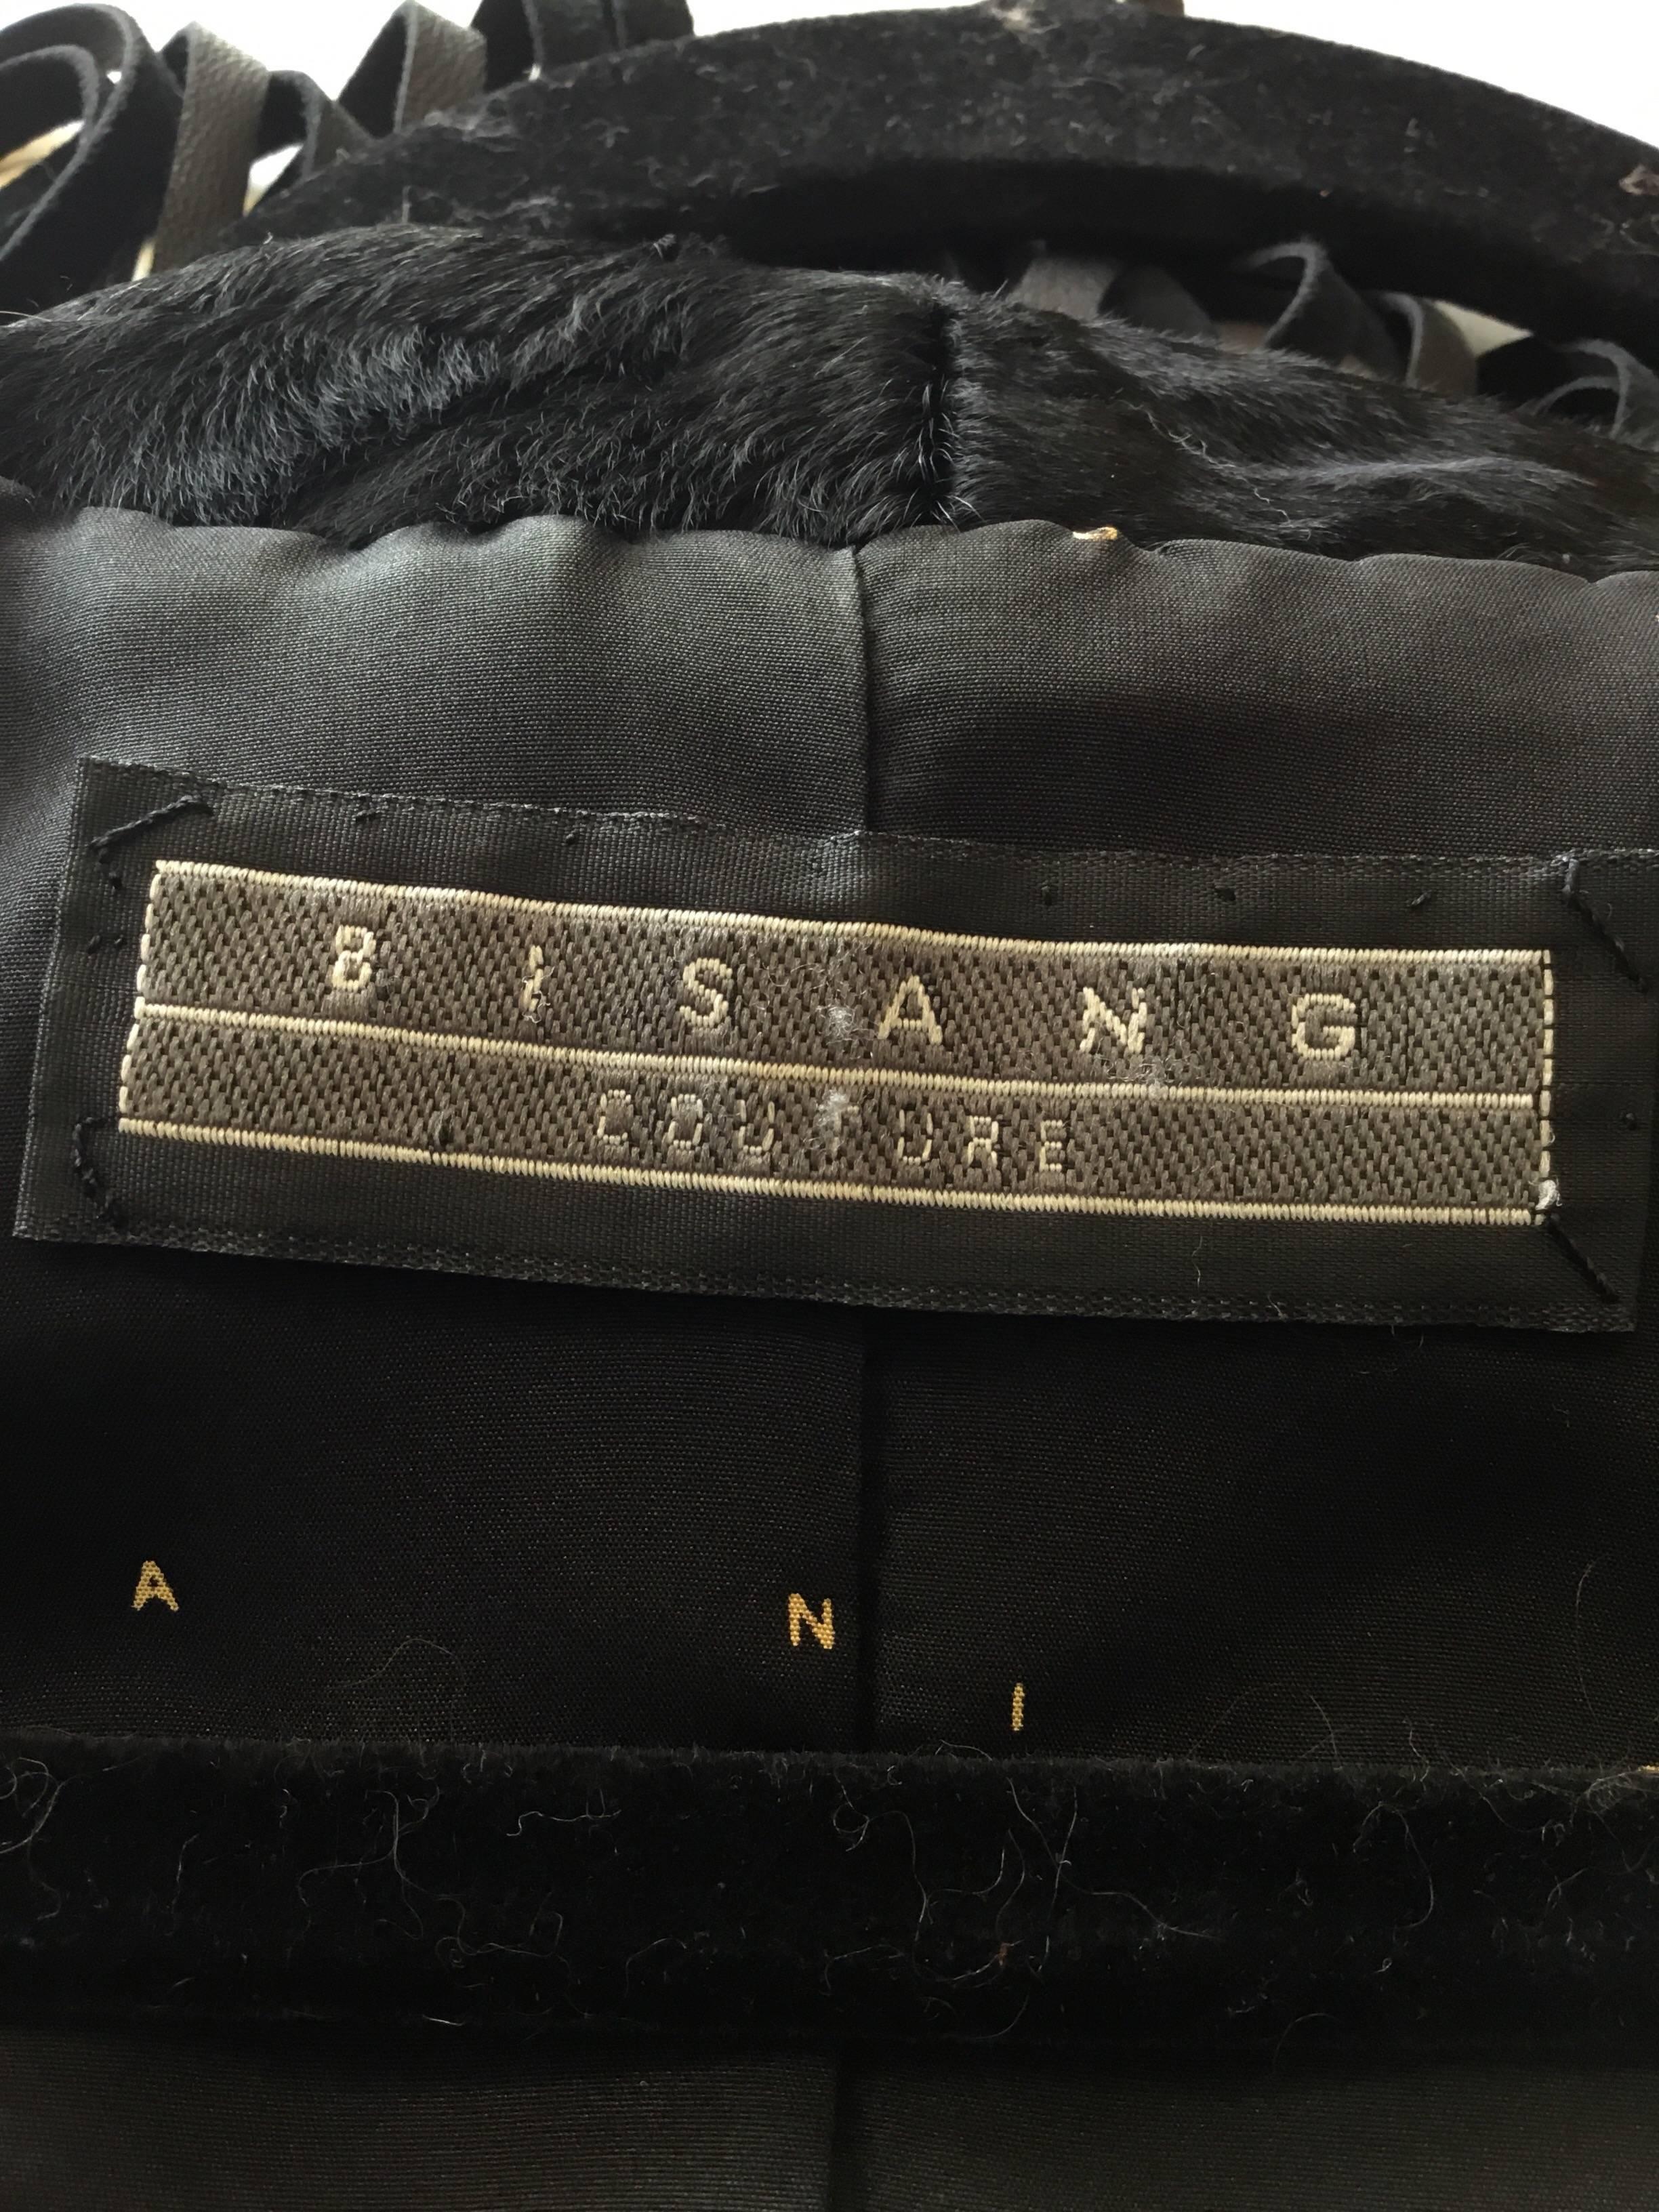 Bisang Couture Broadtail Jacket with Leather Fringe In Excellent Condition For Sale In Carmel, CA